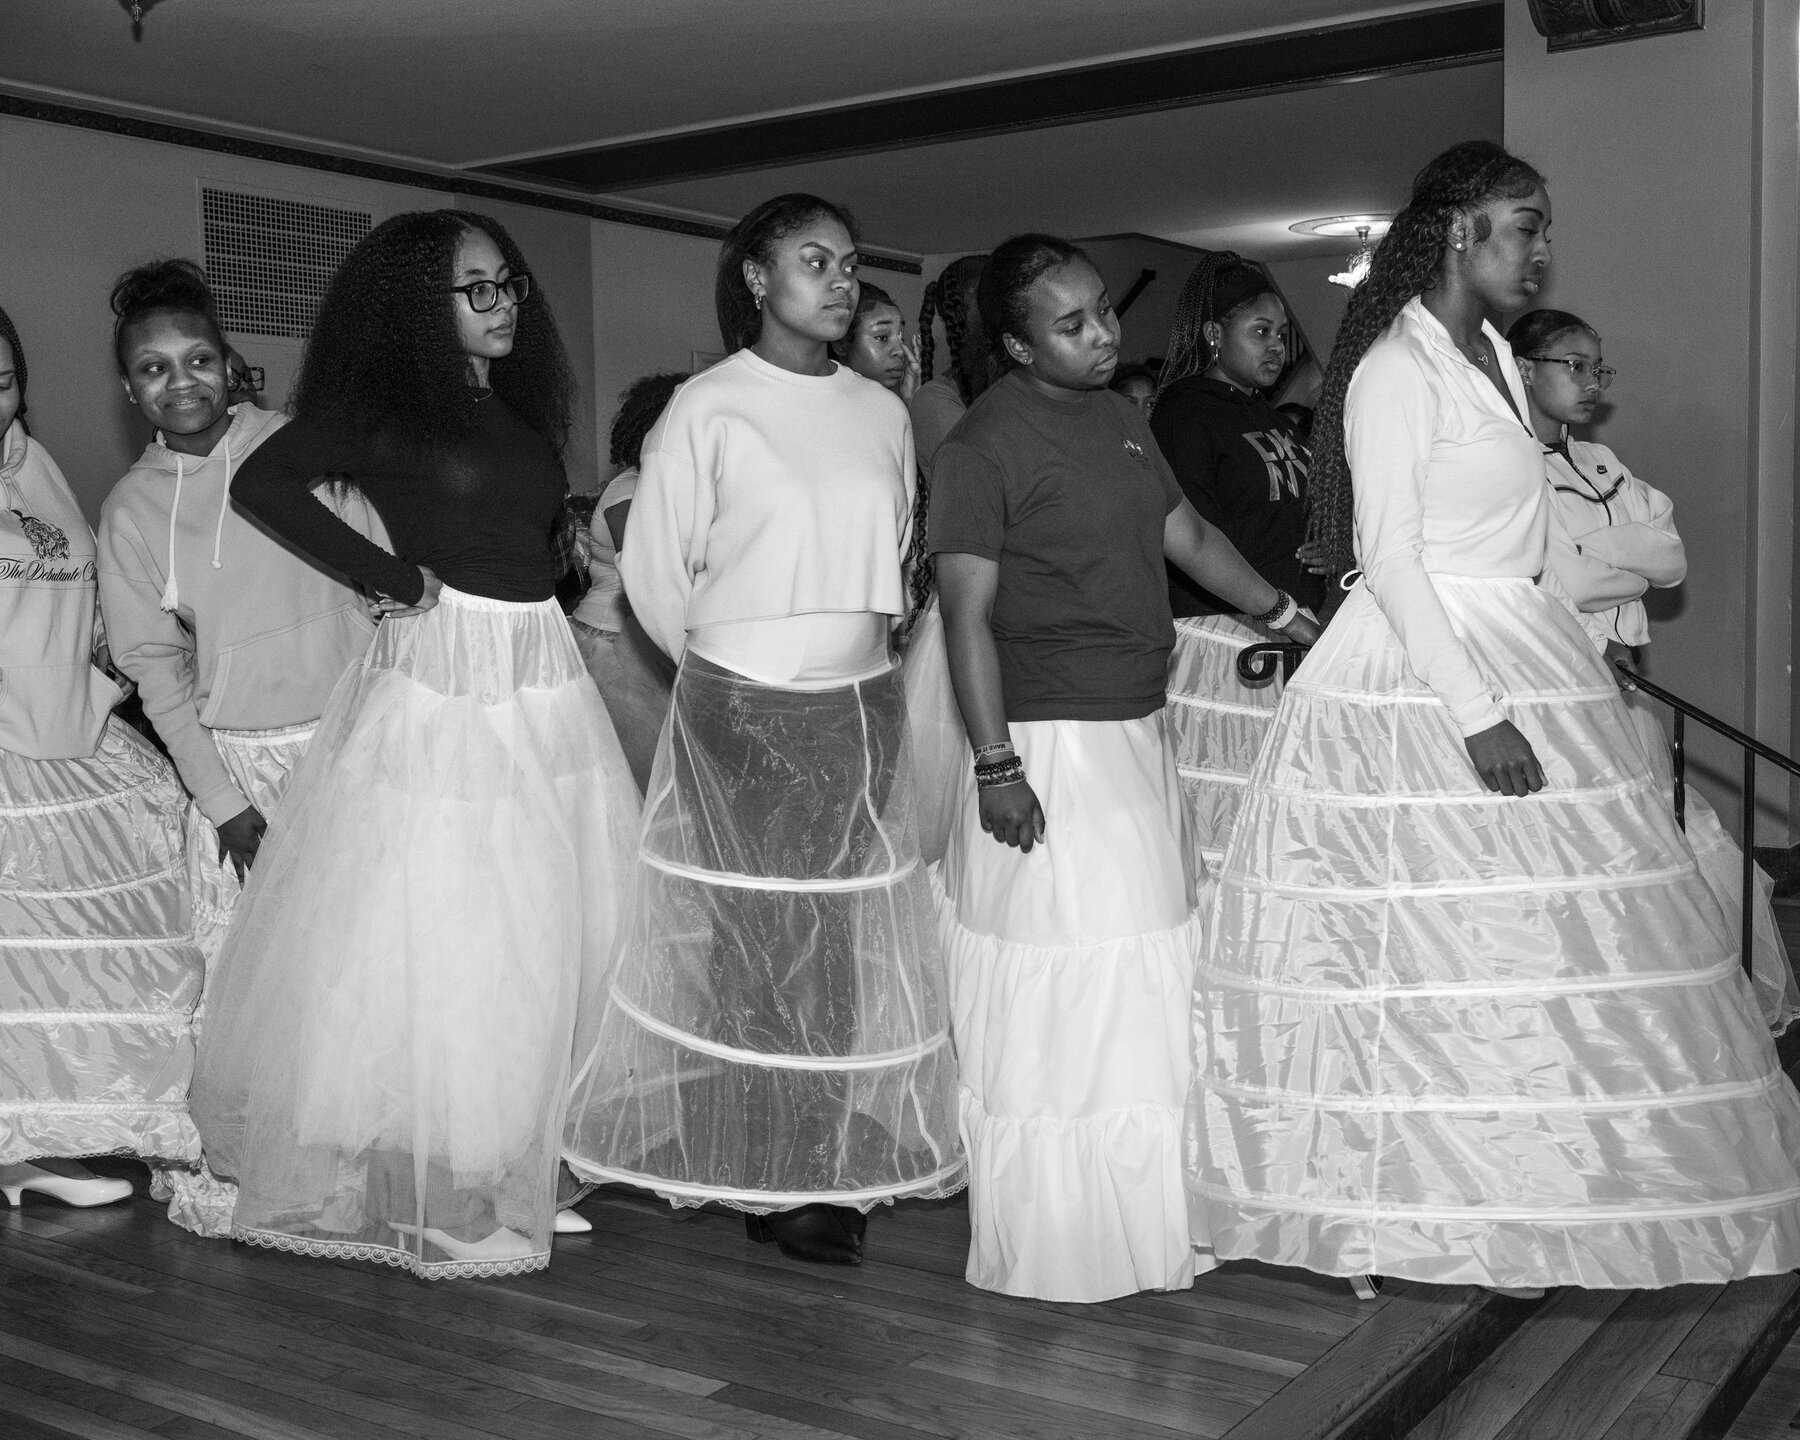 A group of young women wearing white hoop skirts or petticoats and T-shirts of sweatshirts. They stand at the top of a wood staircase, looking at something off camera to the right.